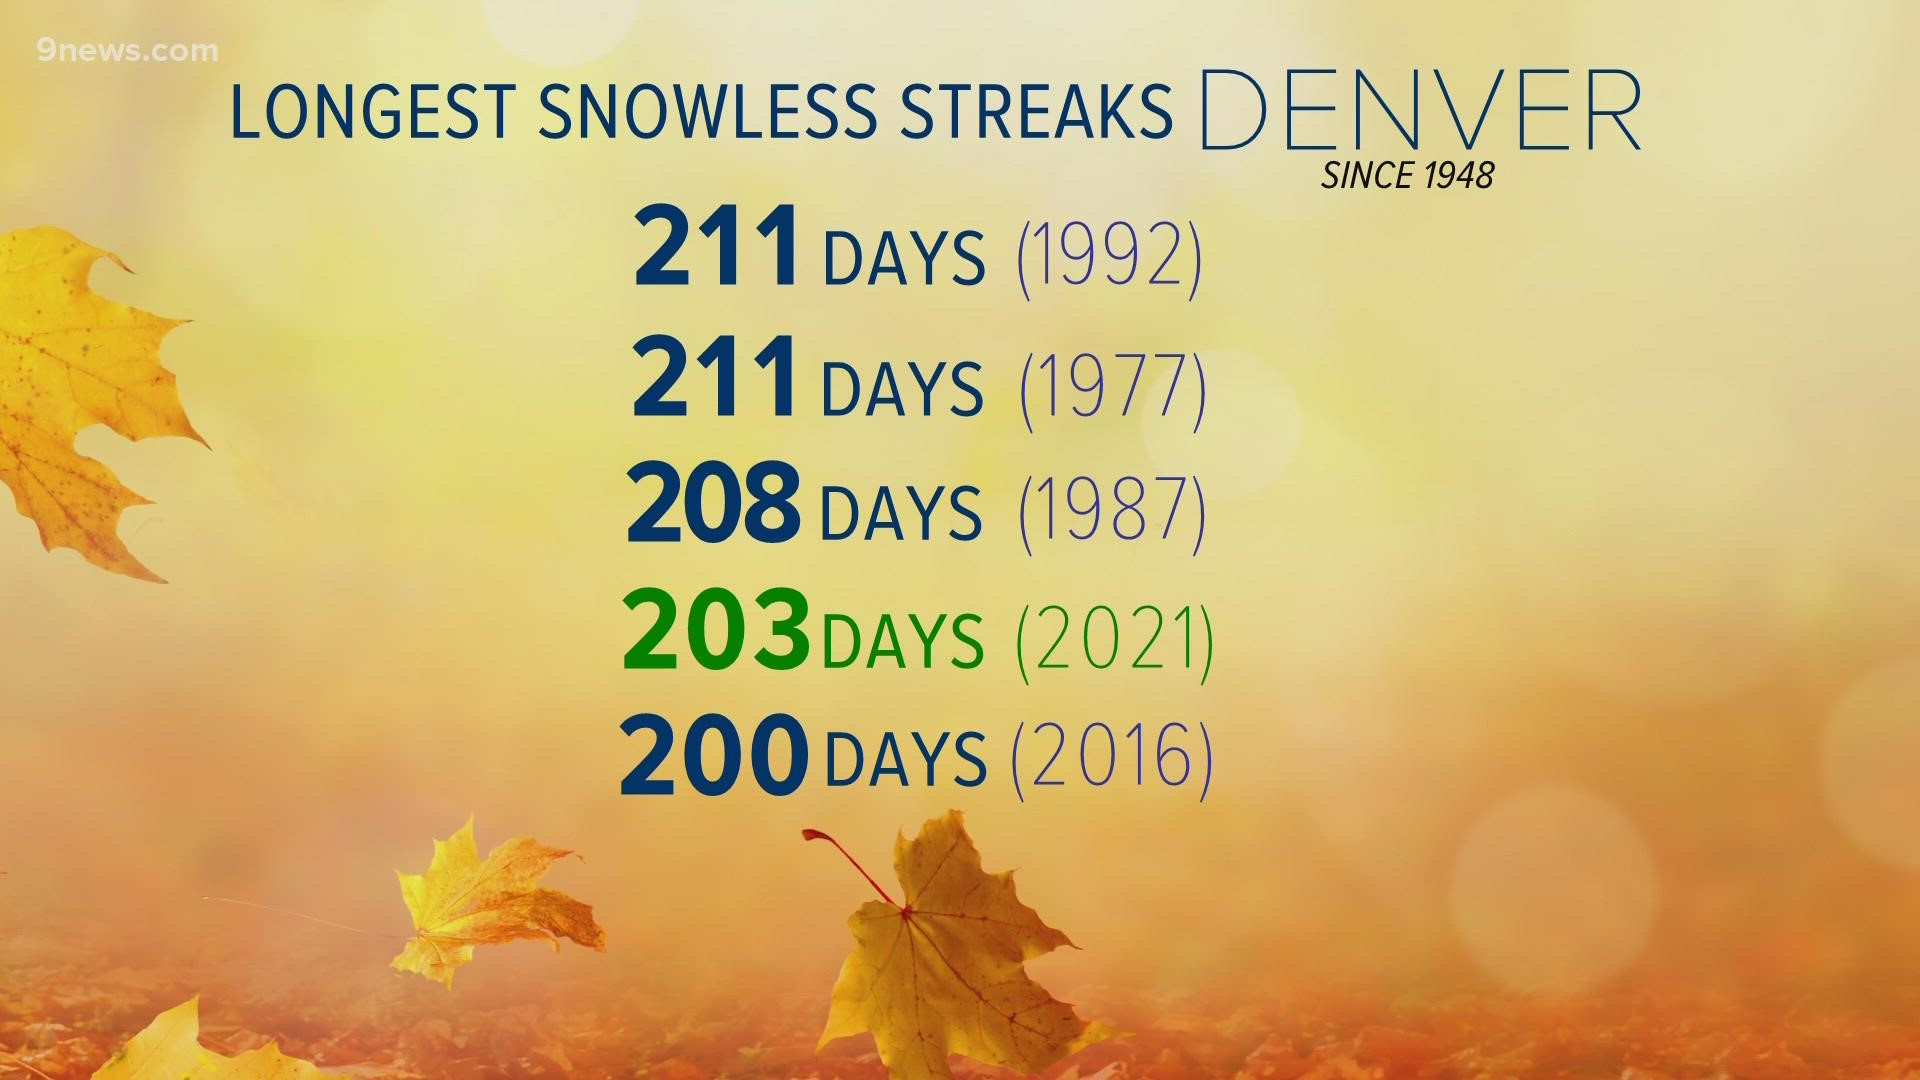 It's been 203 days since Denver has seen snowflakes falling closing